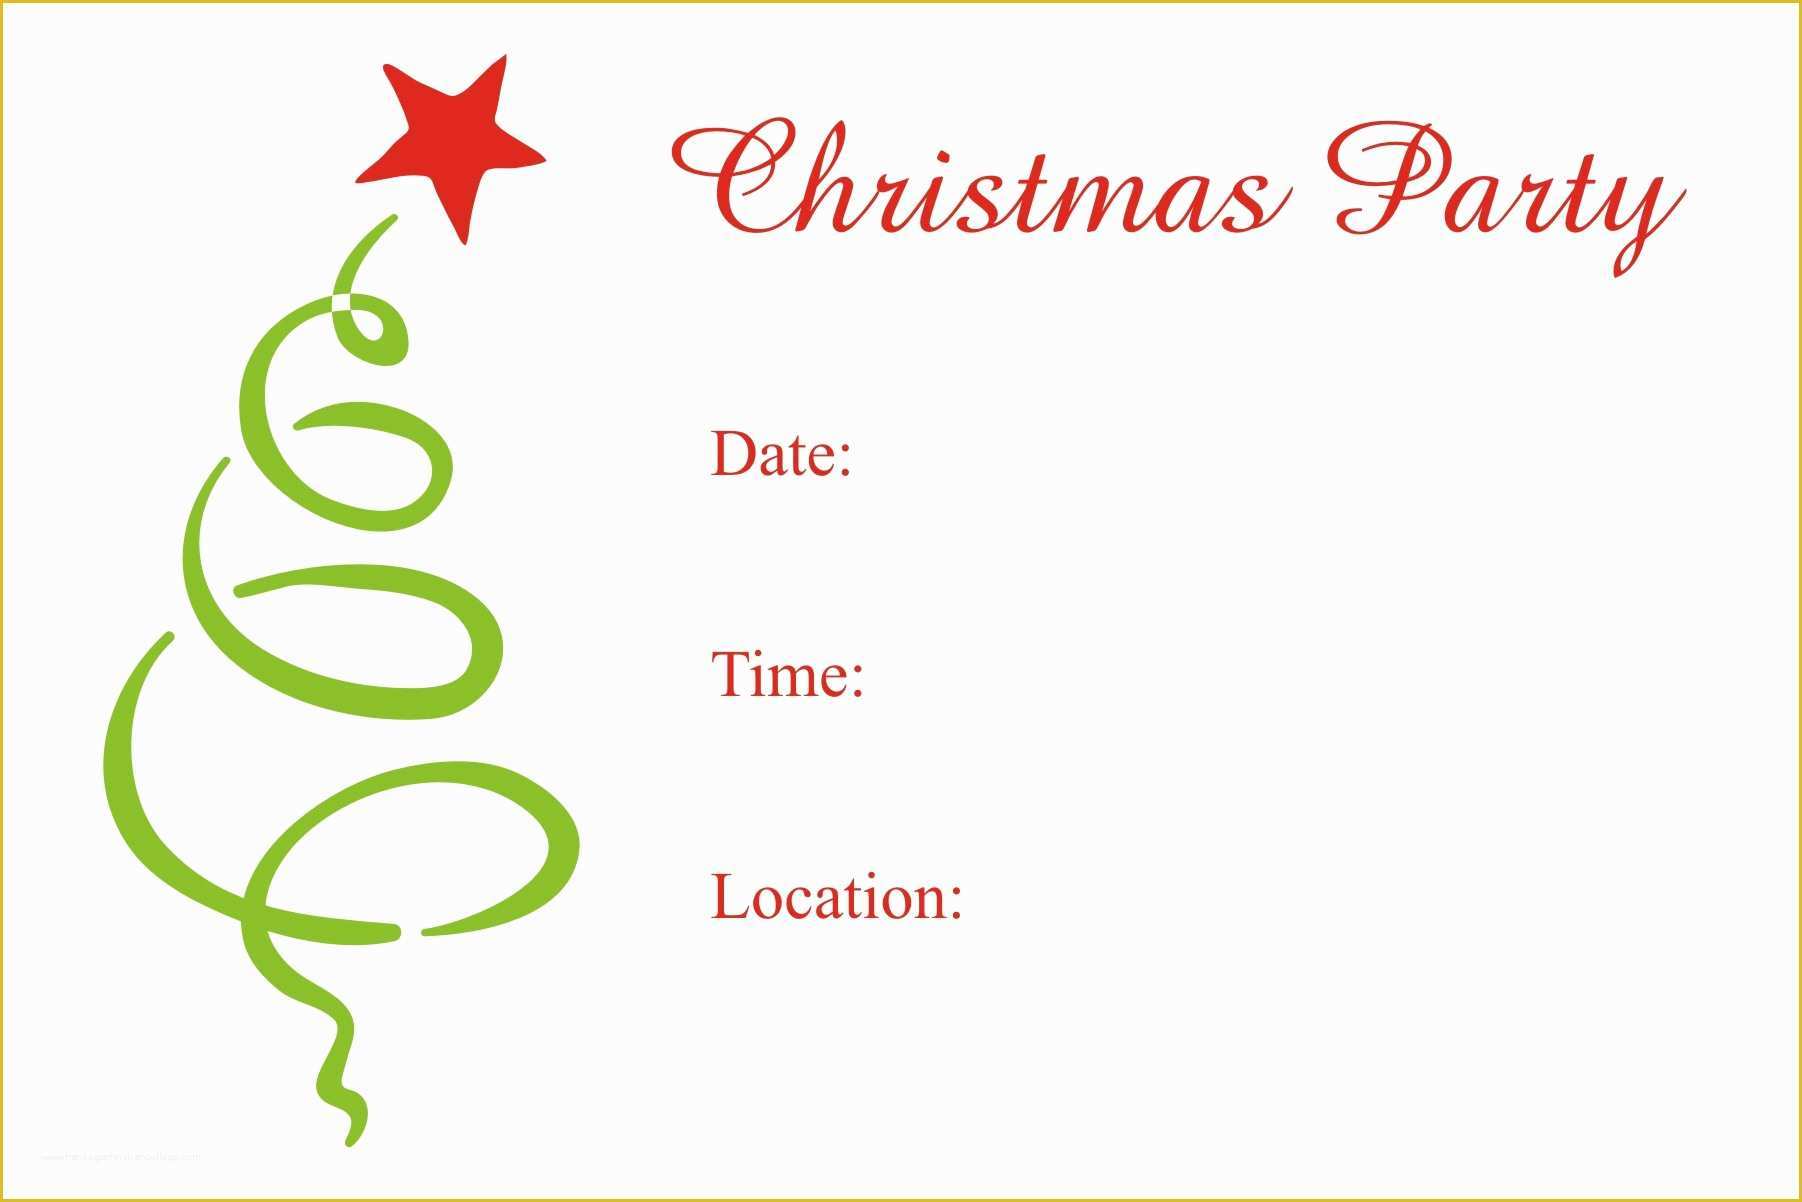 Online Christmas Party Invitation Templates Free Of Line Christmas Party Invitation Templates Free